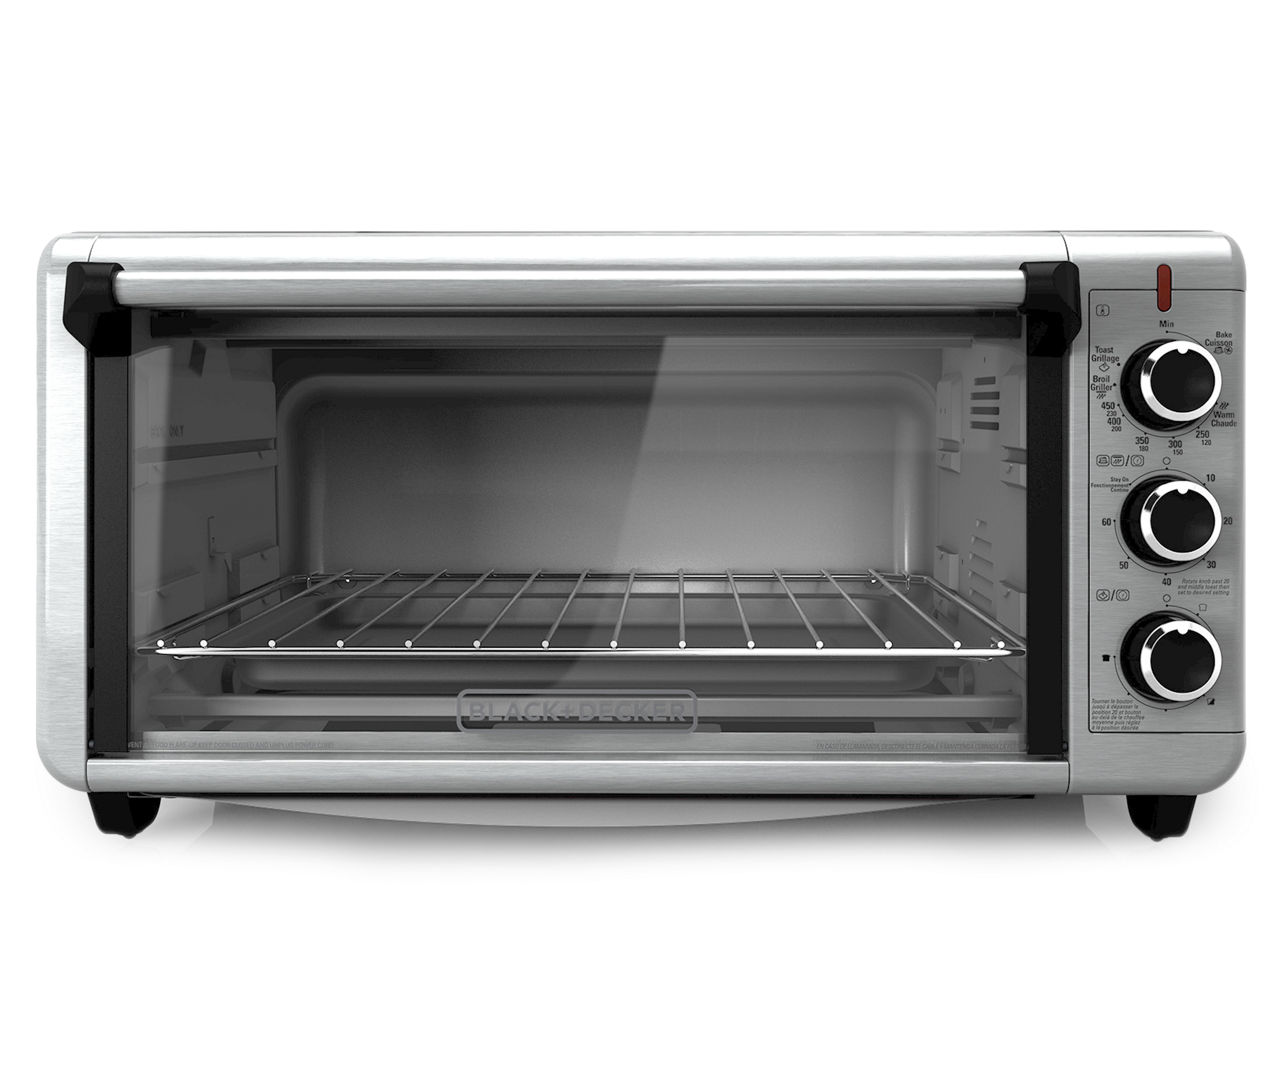 Extra-Wide Toaster Oven